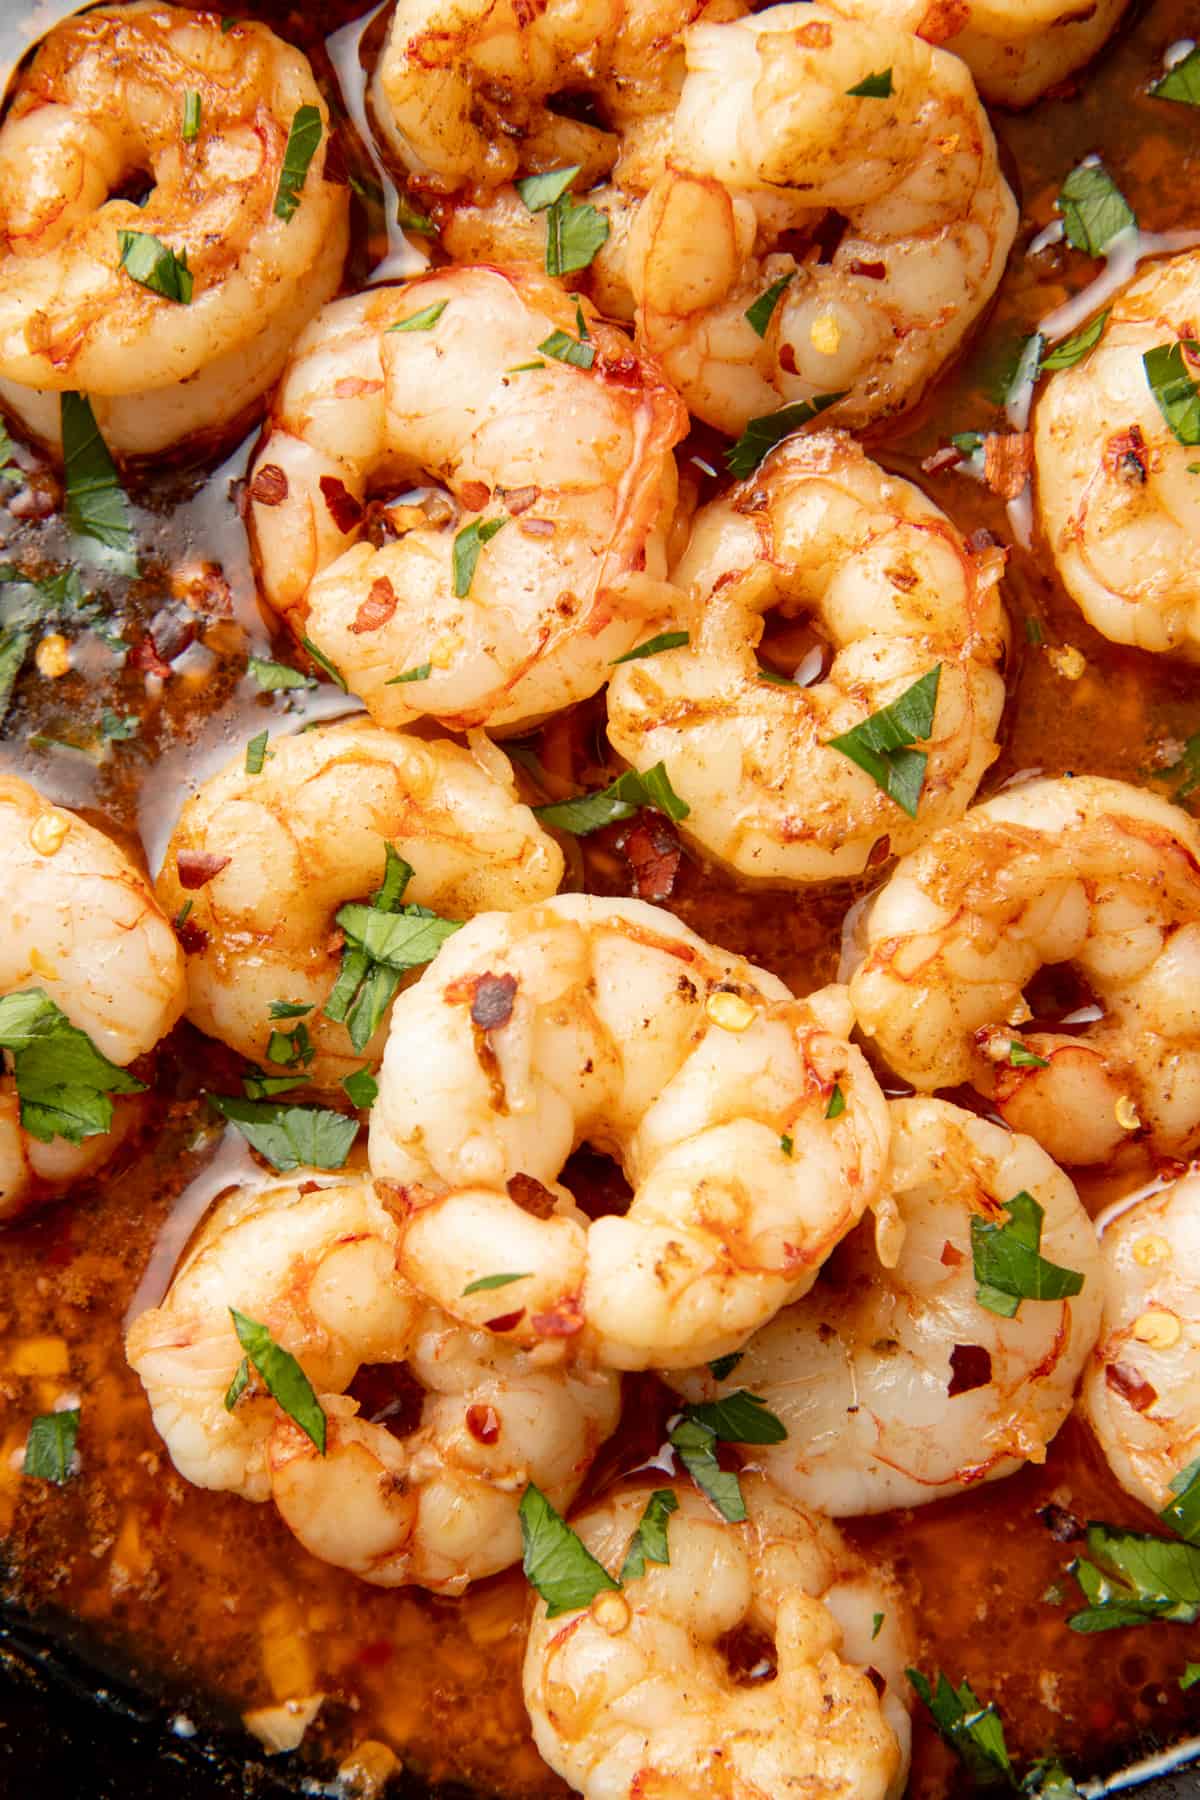 Cooked shrimp sit in sauce.